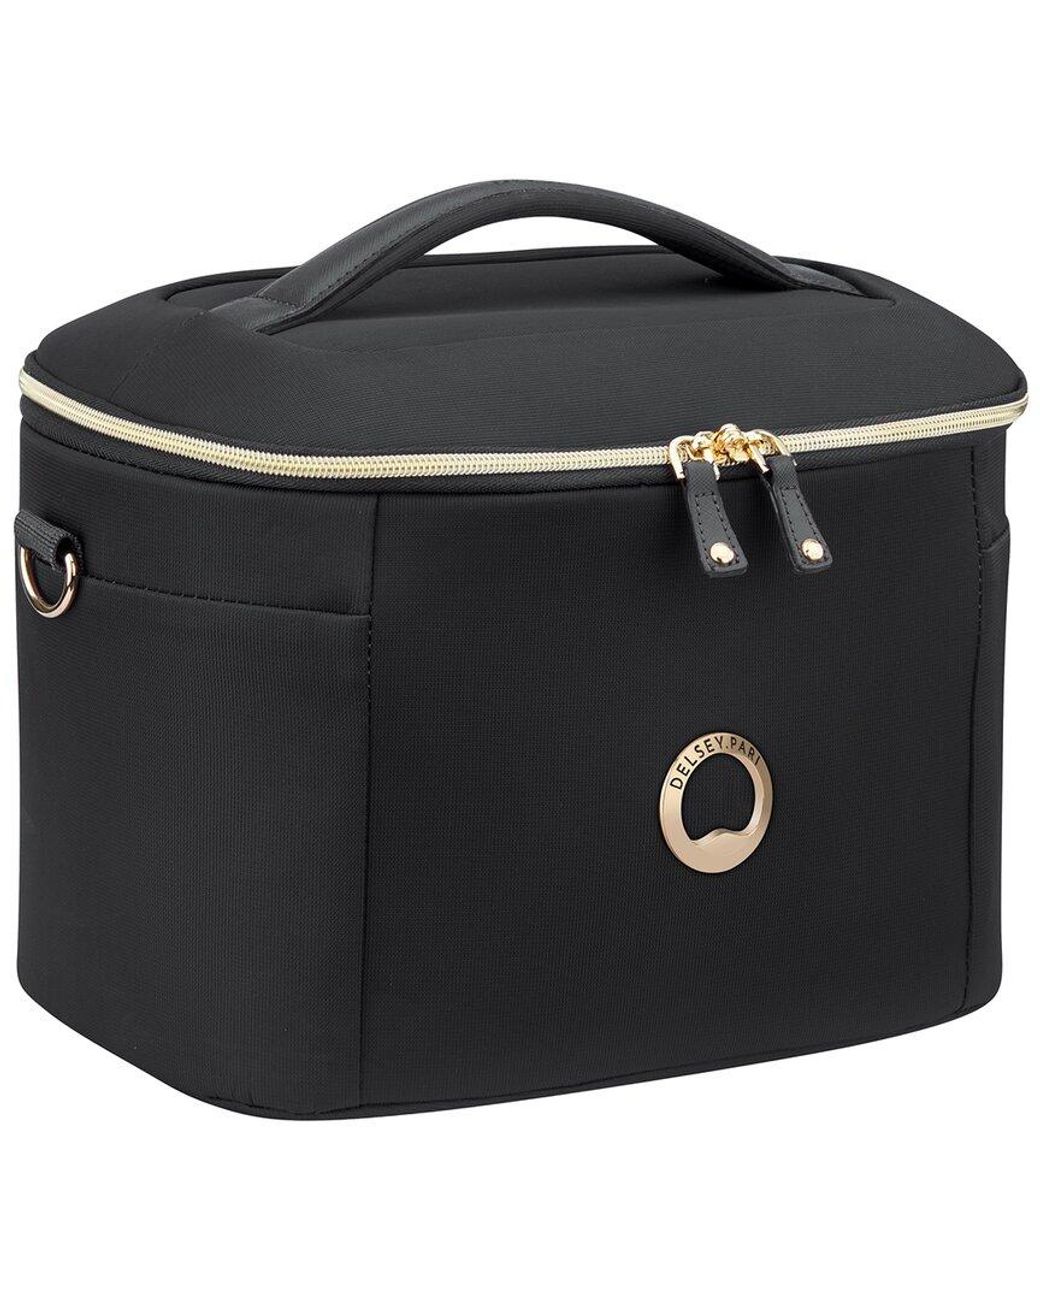 Delsey Montrouge Tote Beauty Case in Black | Lyst